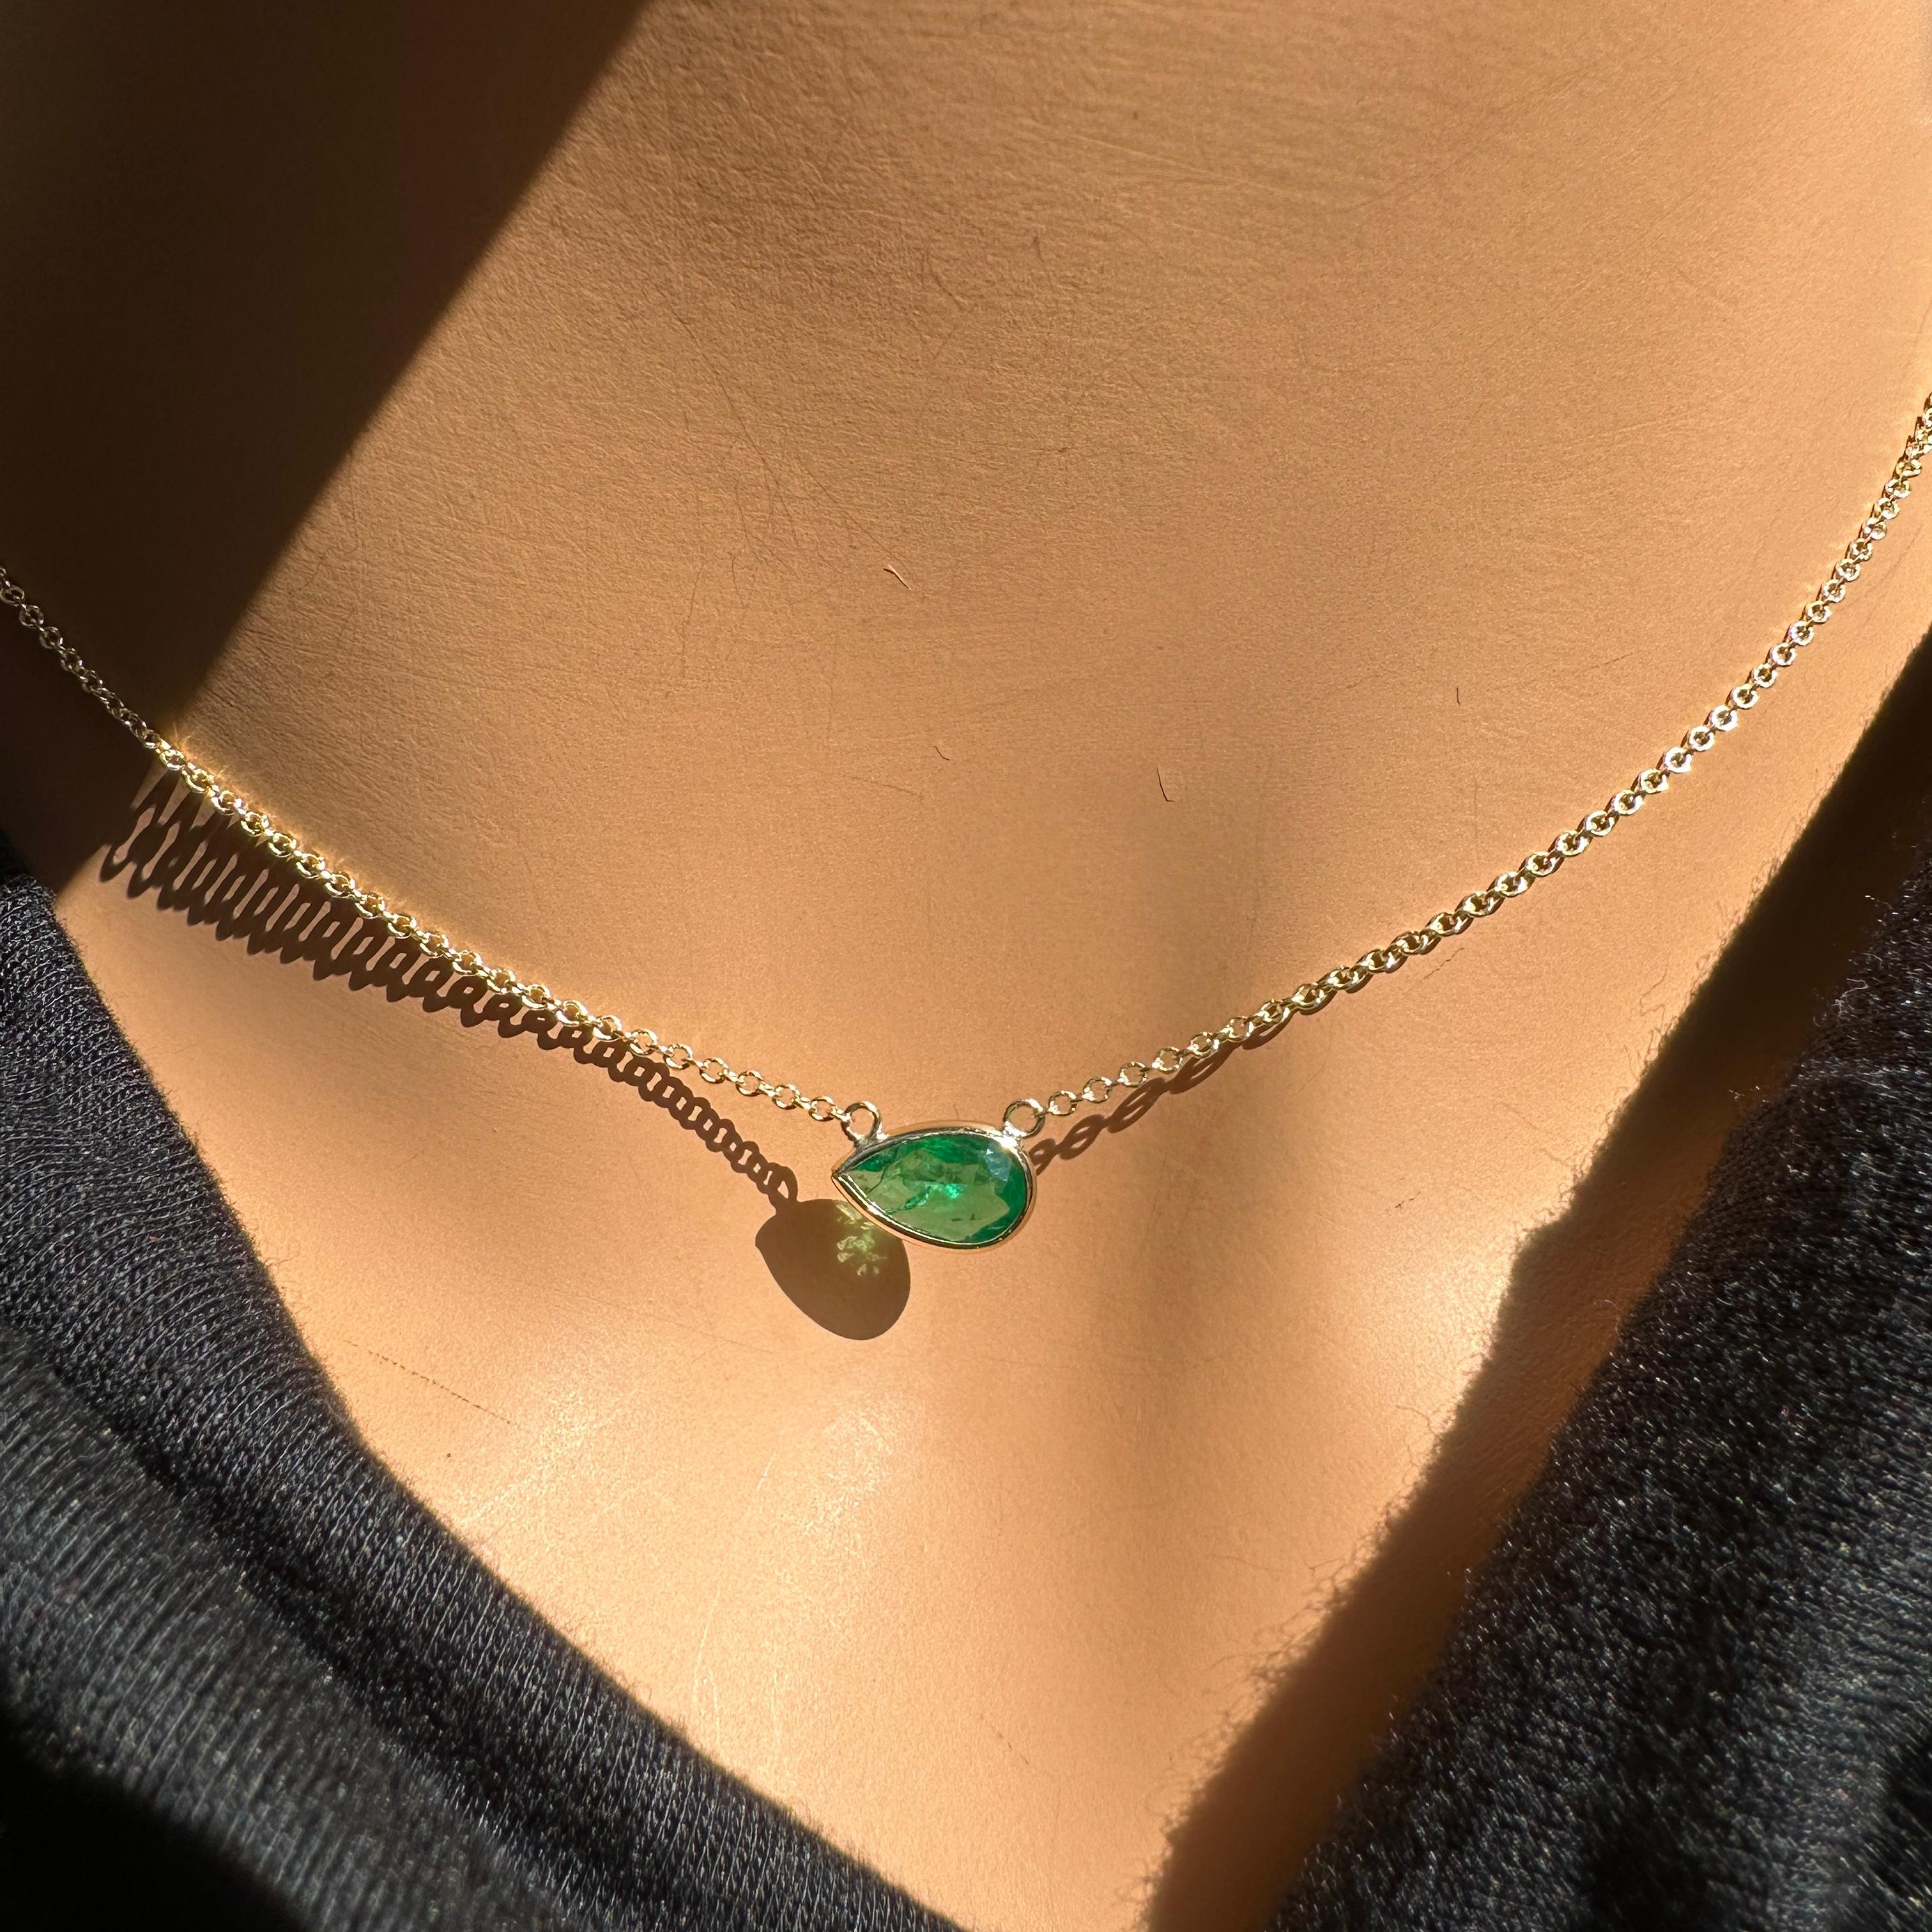 A fashion necklace made of 14k yellow gold with a main stone of a pear-shaped emerald weighing 0.90 carats and certified by IGITL would be a stunning and elegant choice. Emeralds are known for their rich green color and timeless beauty, and the pear